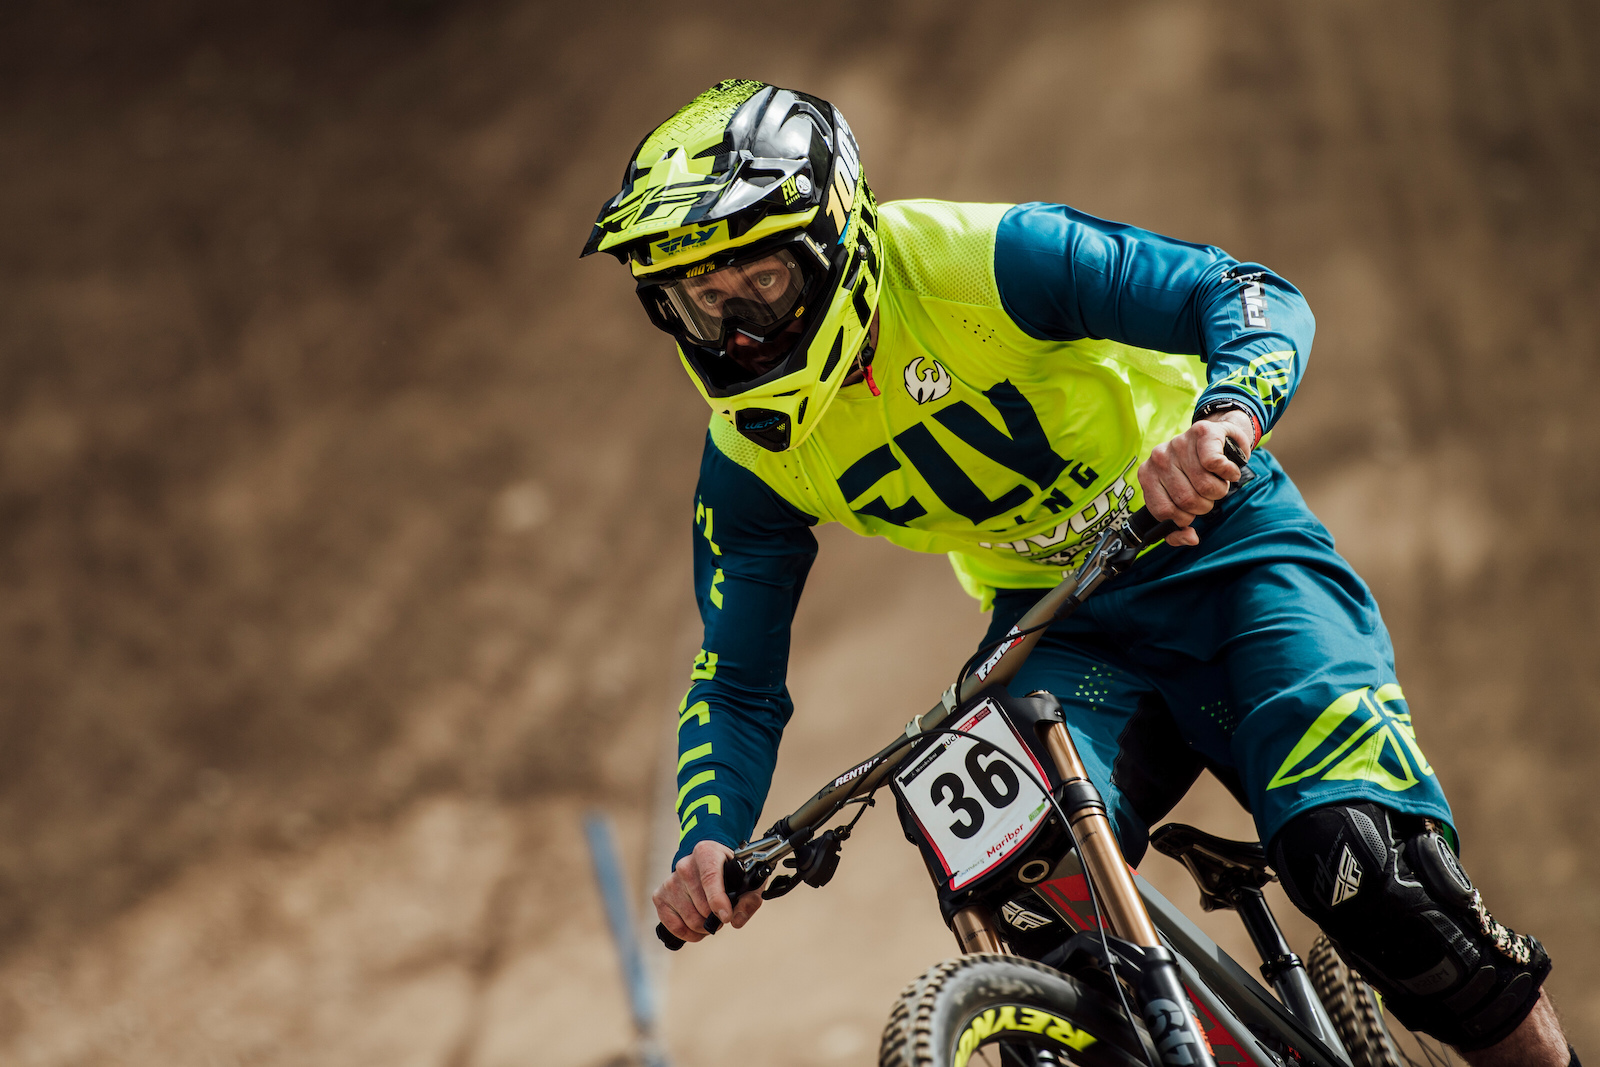 Edward Masters performs at UCI DH World Cup in Maribor, Slovenia on April 28th, 2019 // Bartek Wolinski/Red Bull Content Pool // AP-1Z62AF4TW2511 // Usage for editorial use only //